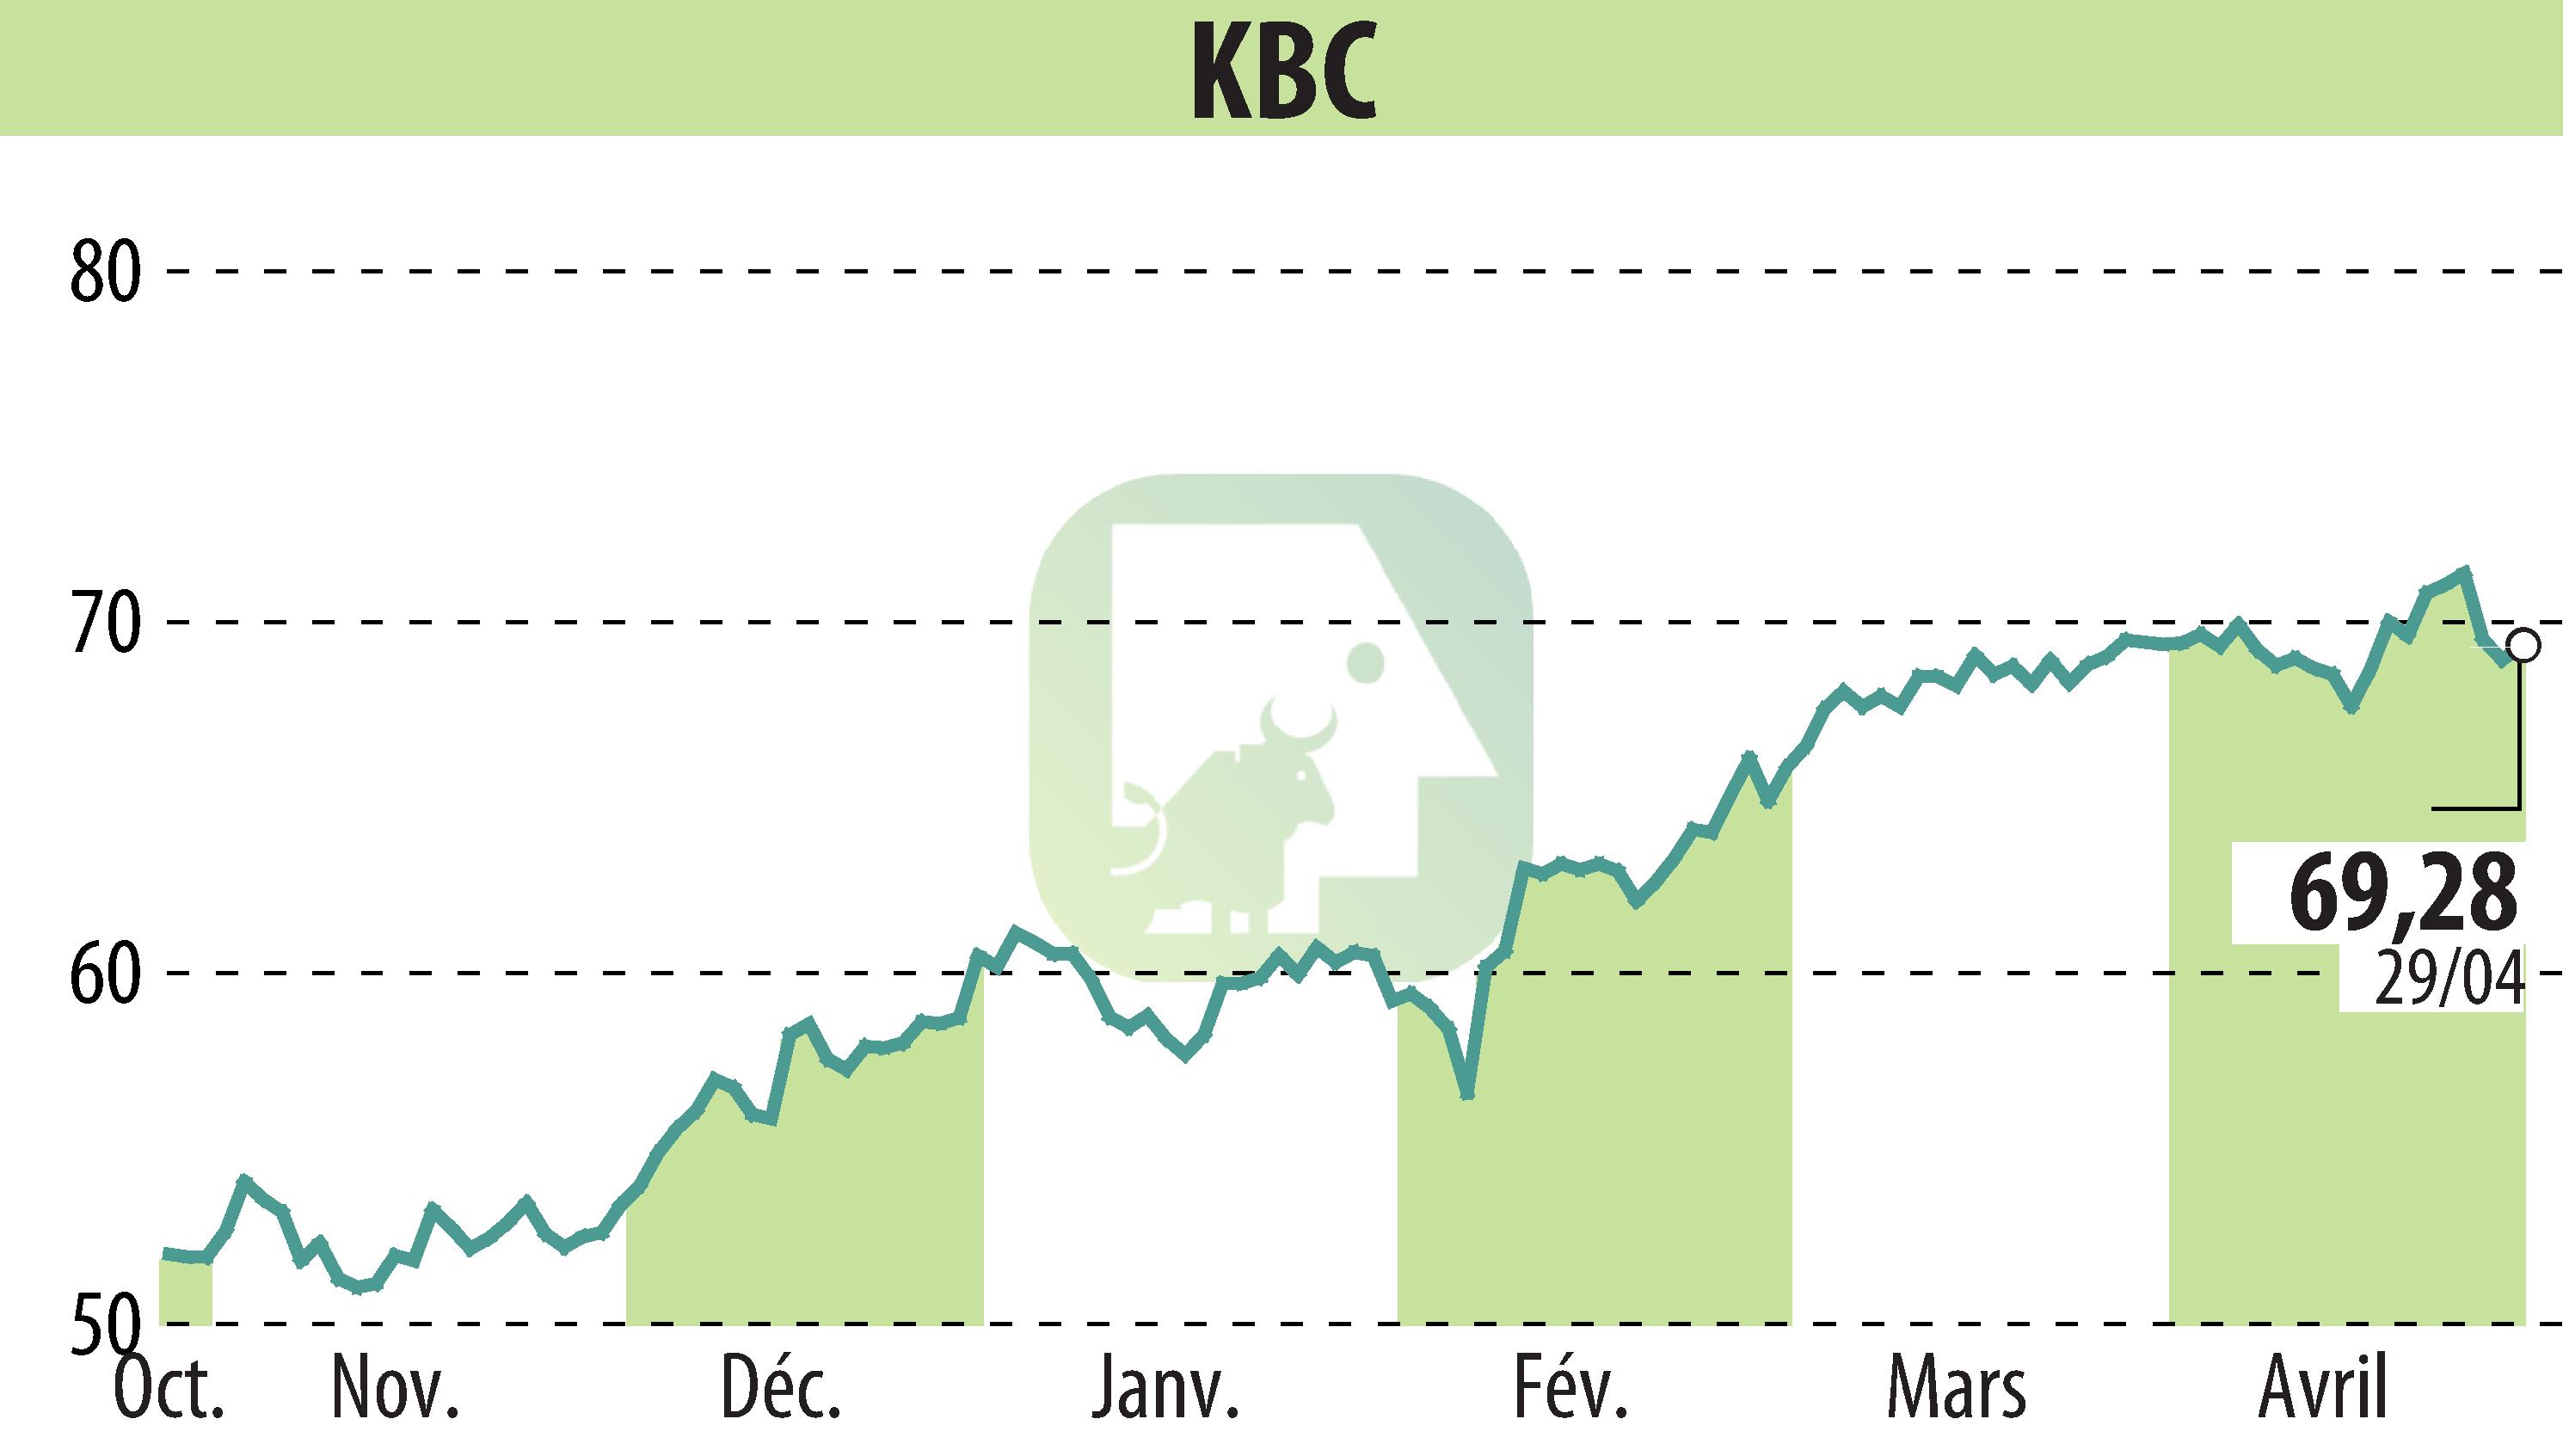 Stock price chart of KBC (EBR:KBC) showing fluctuations.